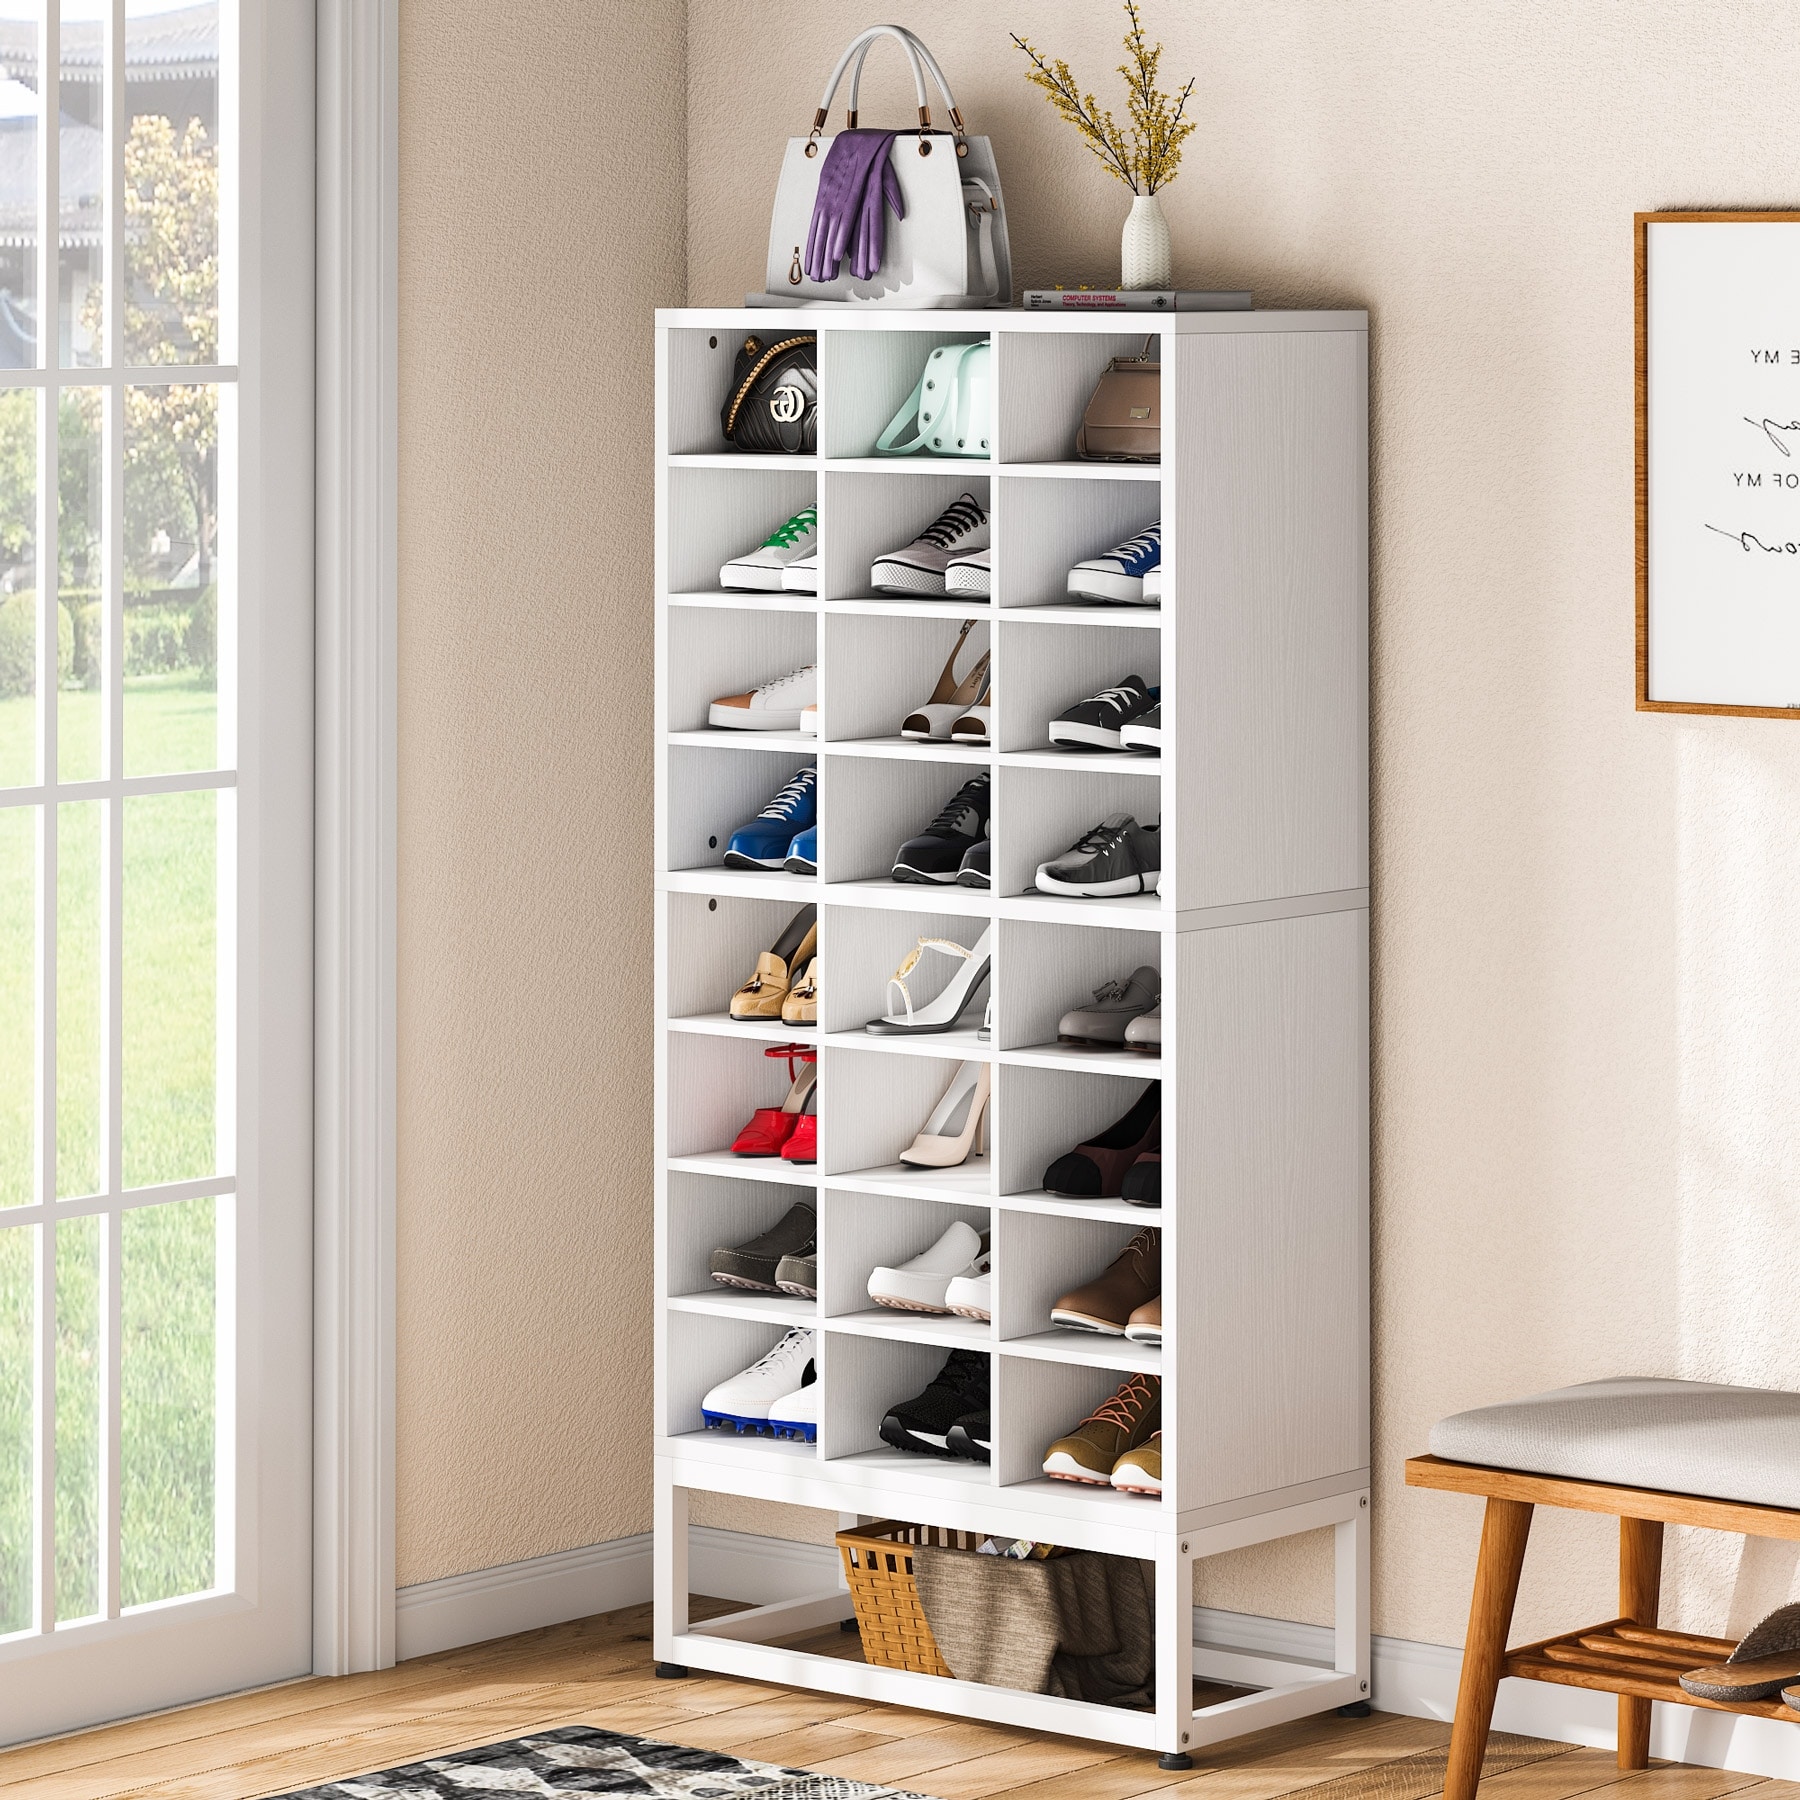 https://ak1.ostkcdn.com/images/products/is/images/direct/96eb349866f4cdbd6e84658225ca55eaa6cbdd10/White-24-Pair-Shoe-Storage-Cabinet%2C-8-Tier-Feestanding-Cube-Shoe-Rack-Closet-Organizers-for-Bedroom%2C-Hallway.jpg